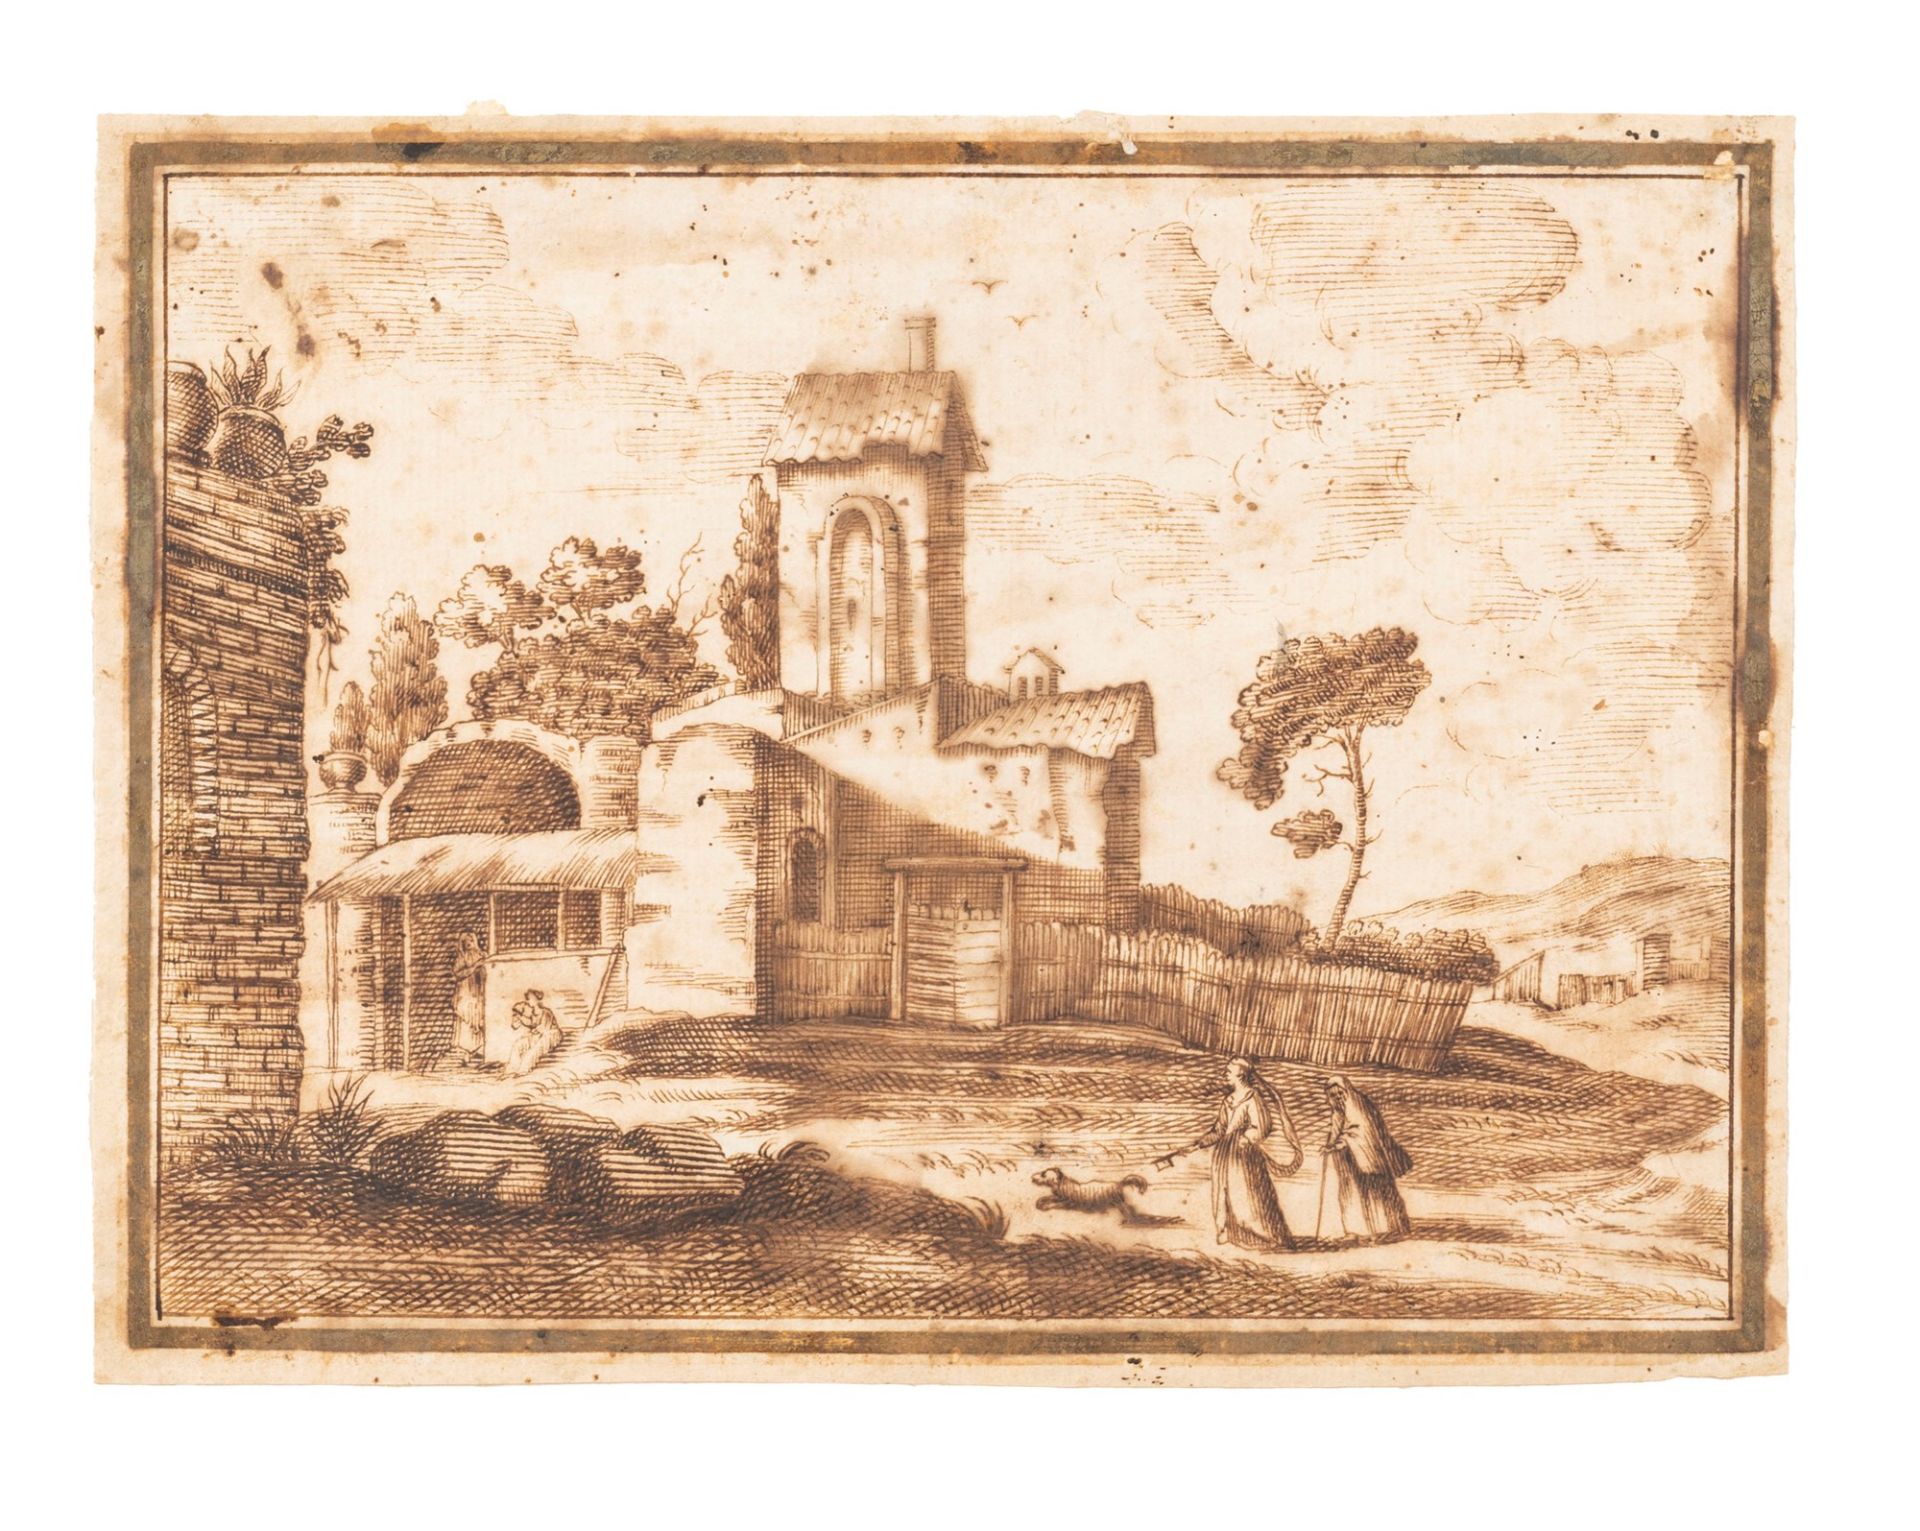 Tuscan school, sixteenth century - Landscape with farmhouse and female figures